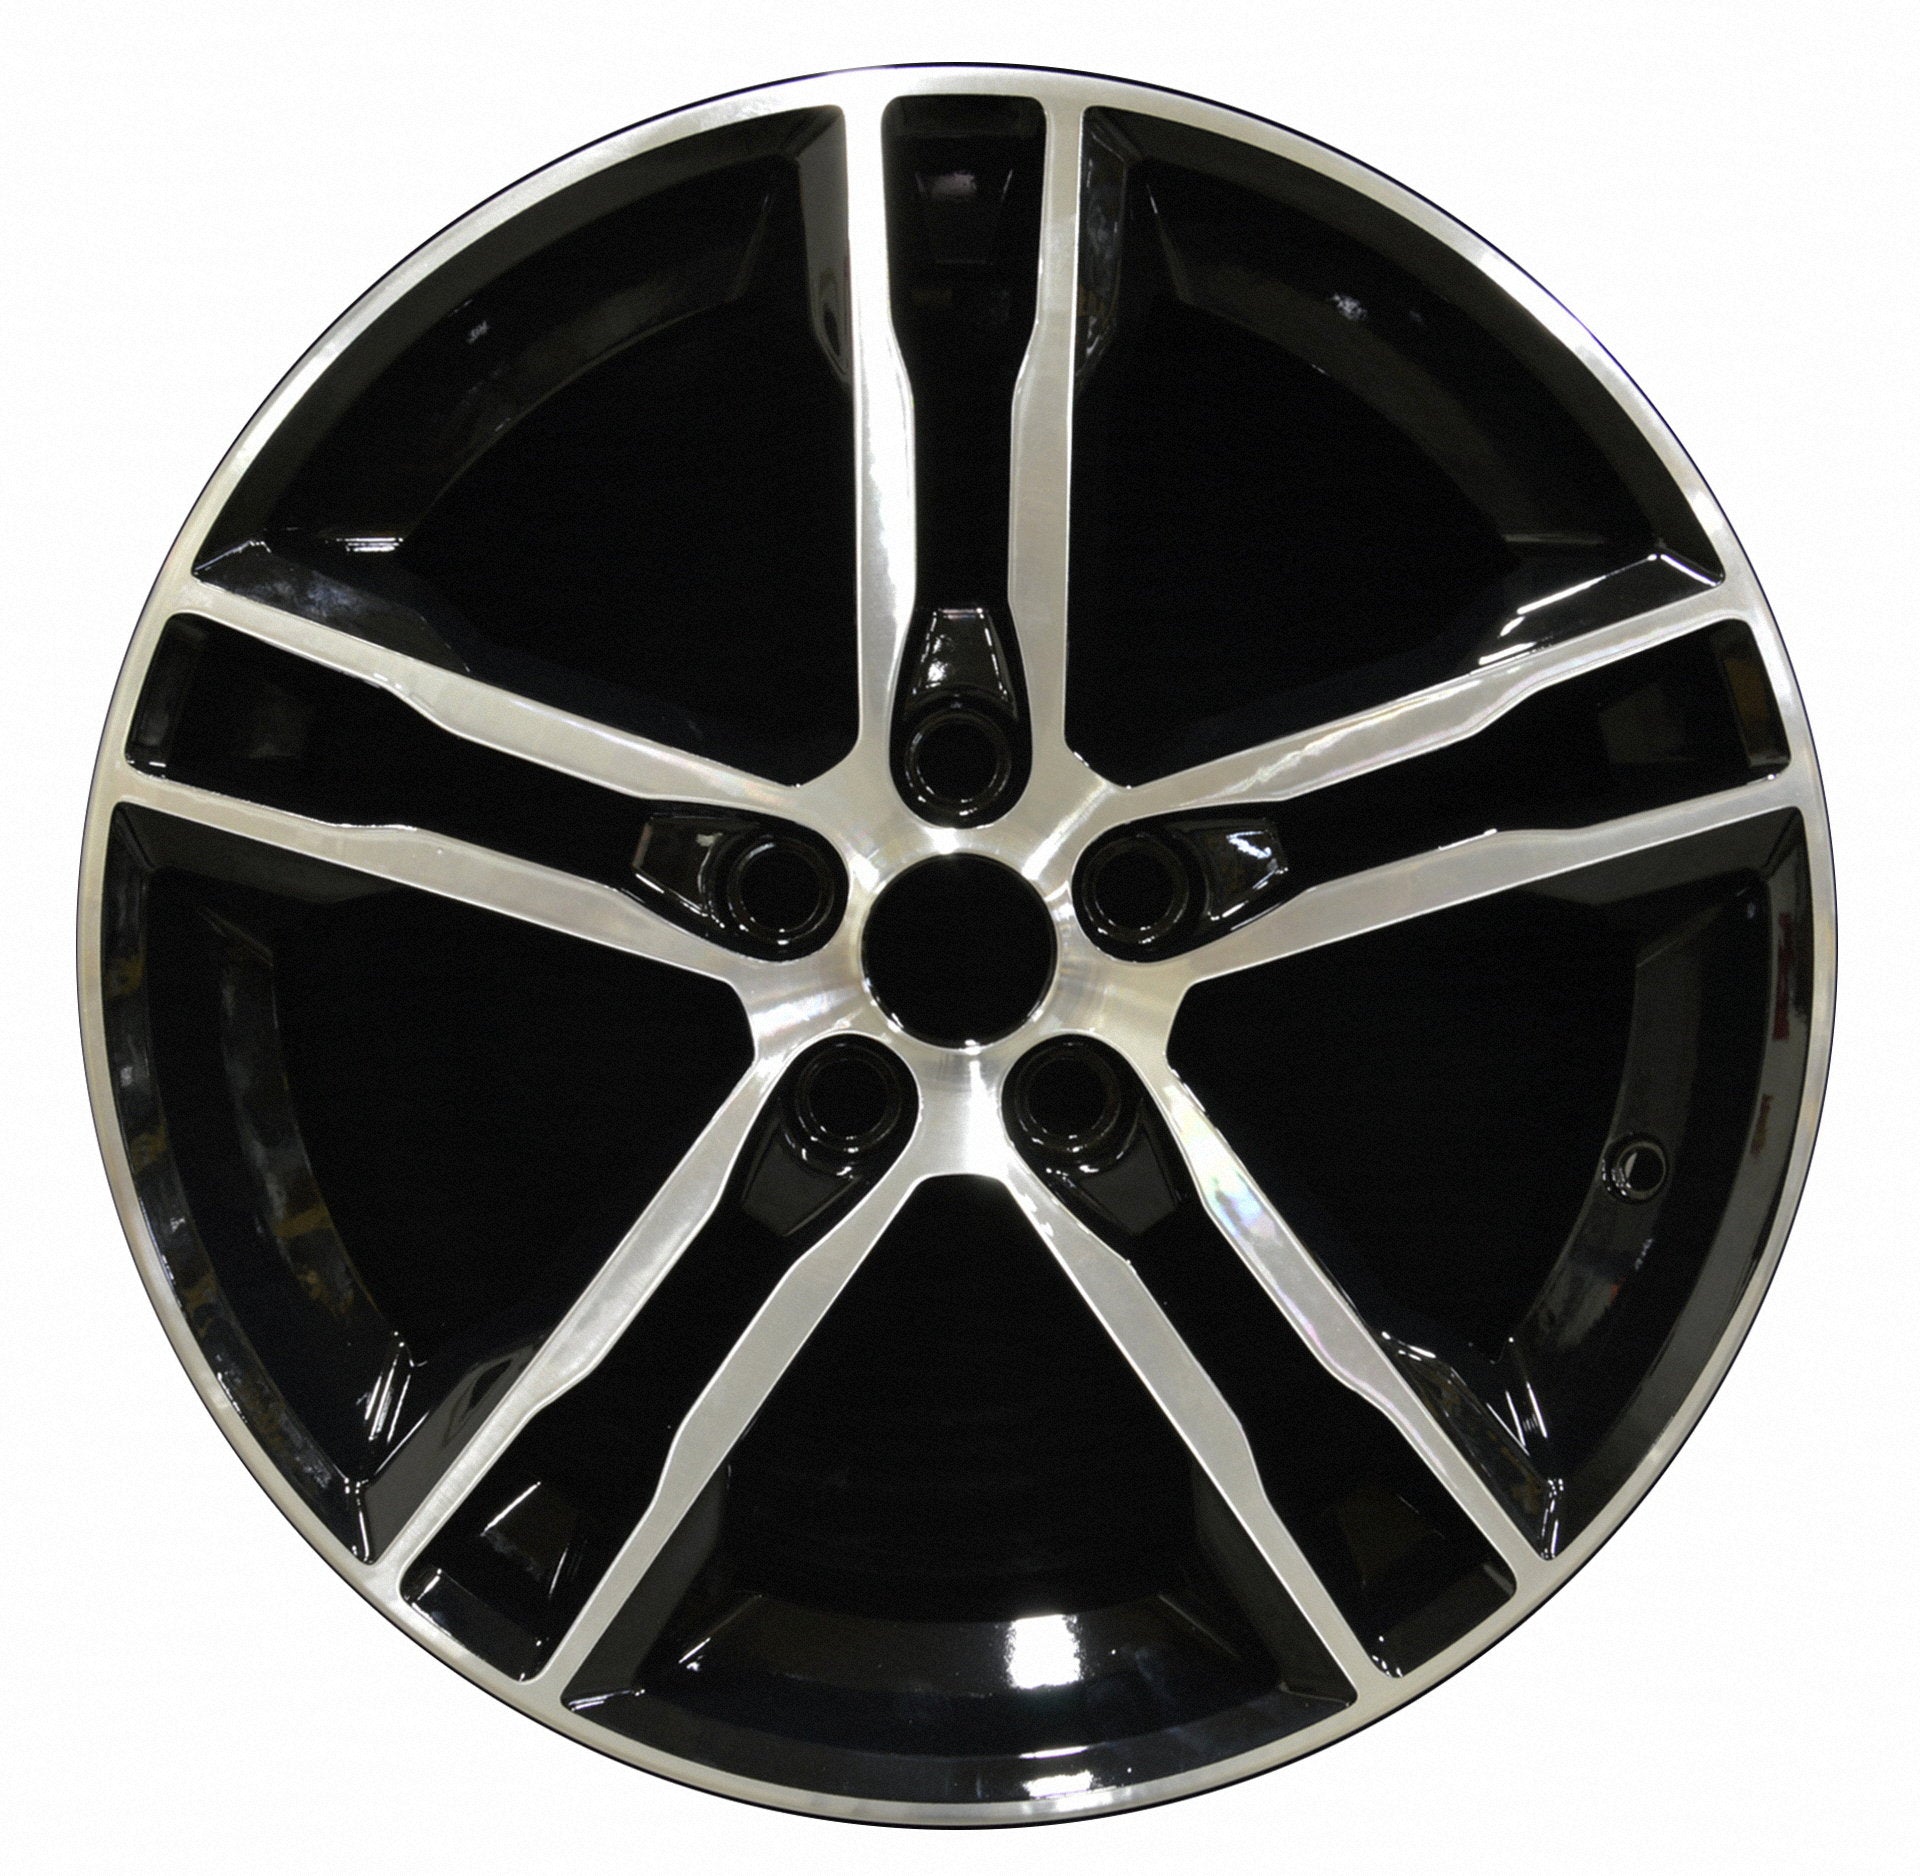 Ford Focus  2015, 2016, 2017, 2018 Factory OEM Car Wheel Size 18x8 Alloy WAO.10015.PB01.MABRT